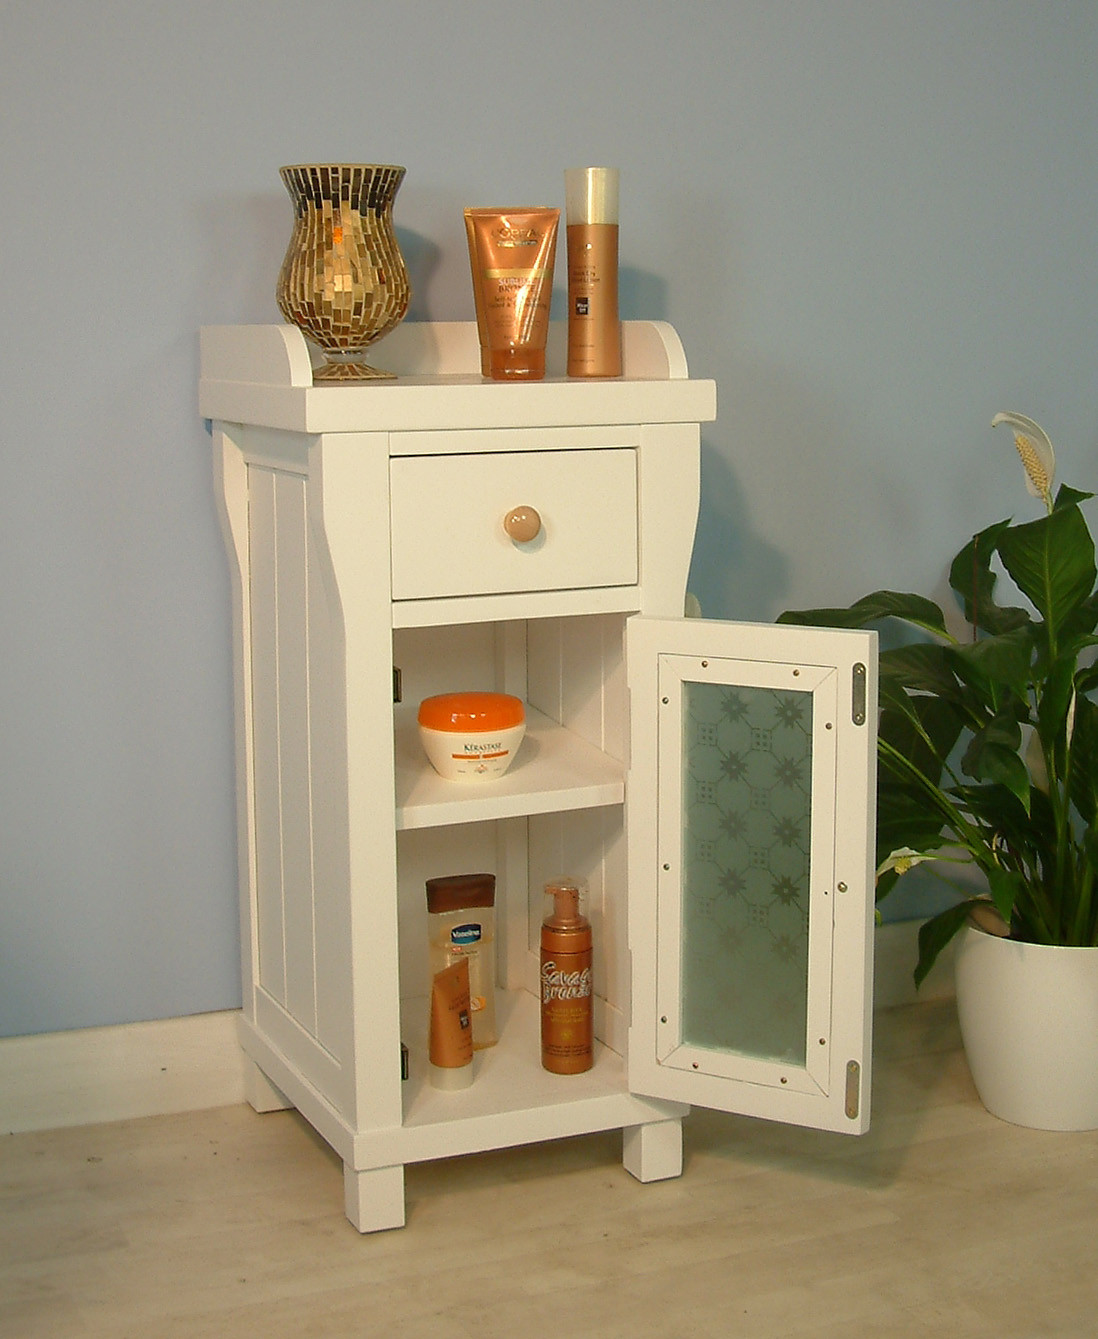 Small Bathroom Storage Cabinets
 9 small bathroom storage ideas you cant afford to overlook